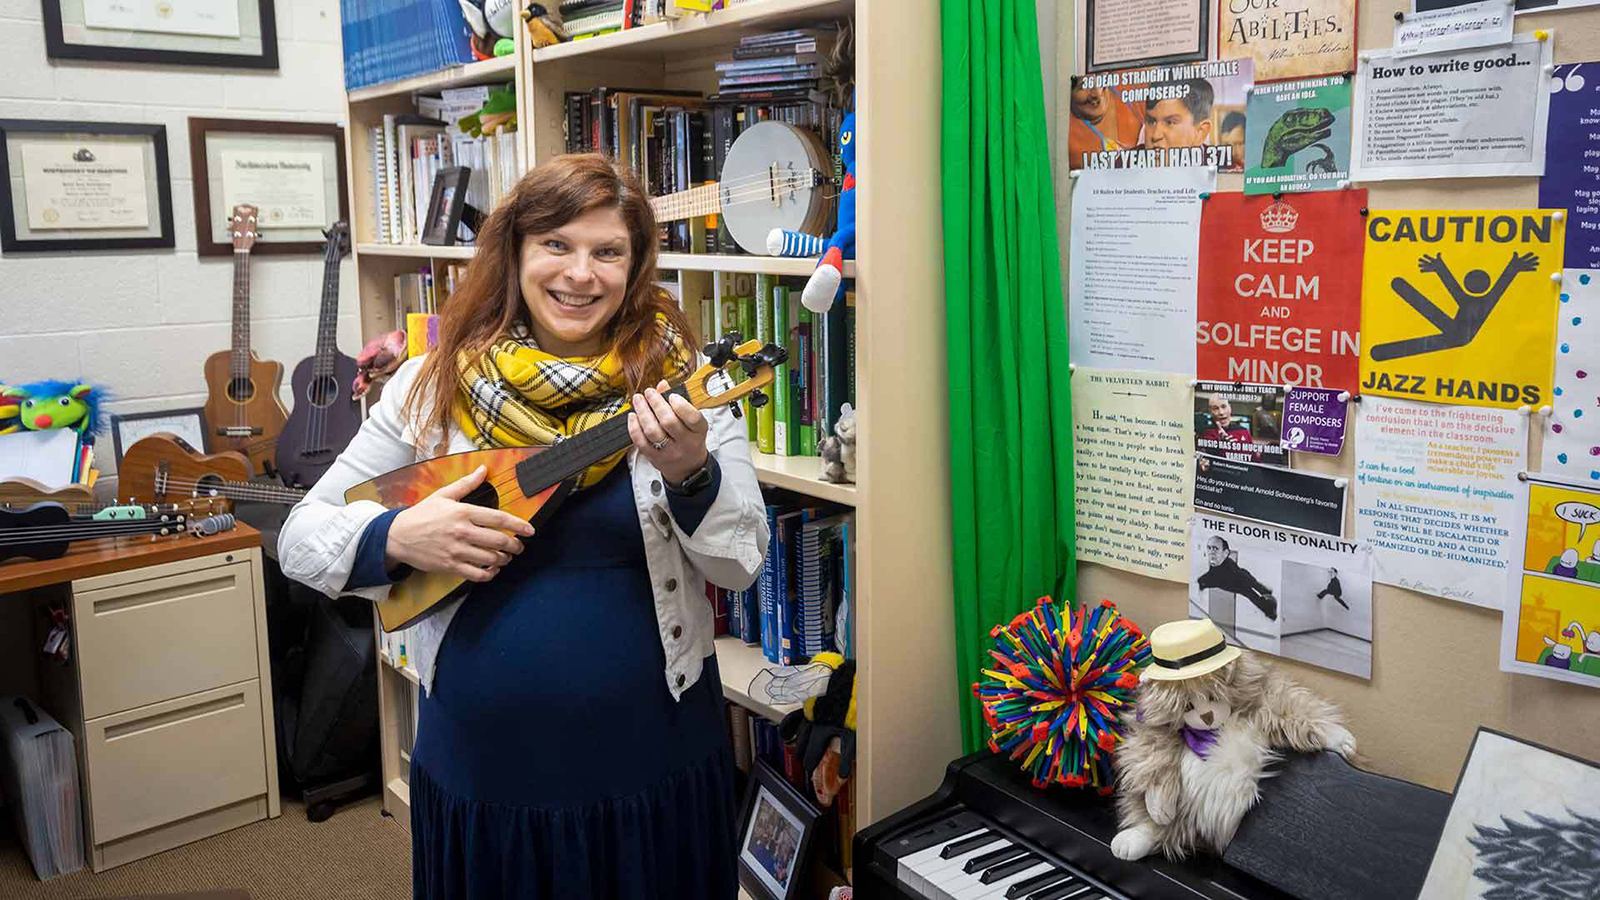  Assistant Professor of music education Robin Giebelhausen plays her favorite ukulele as she shows off fun puppets, stuffed animals, musical instruments and memes throughout her office in The Clarice Smith Performing Arts Center.